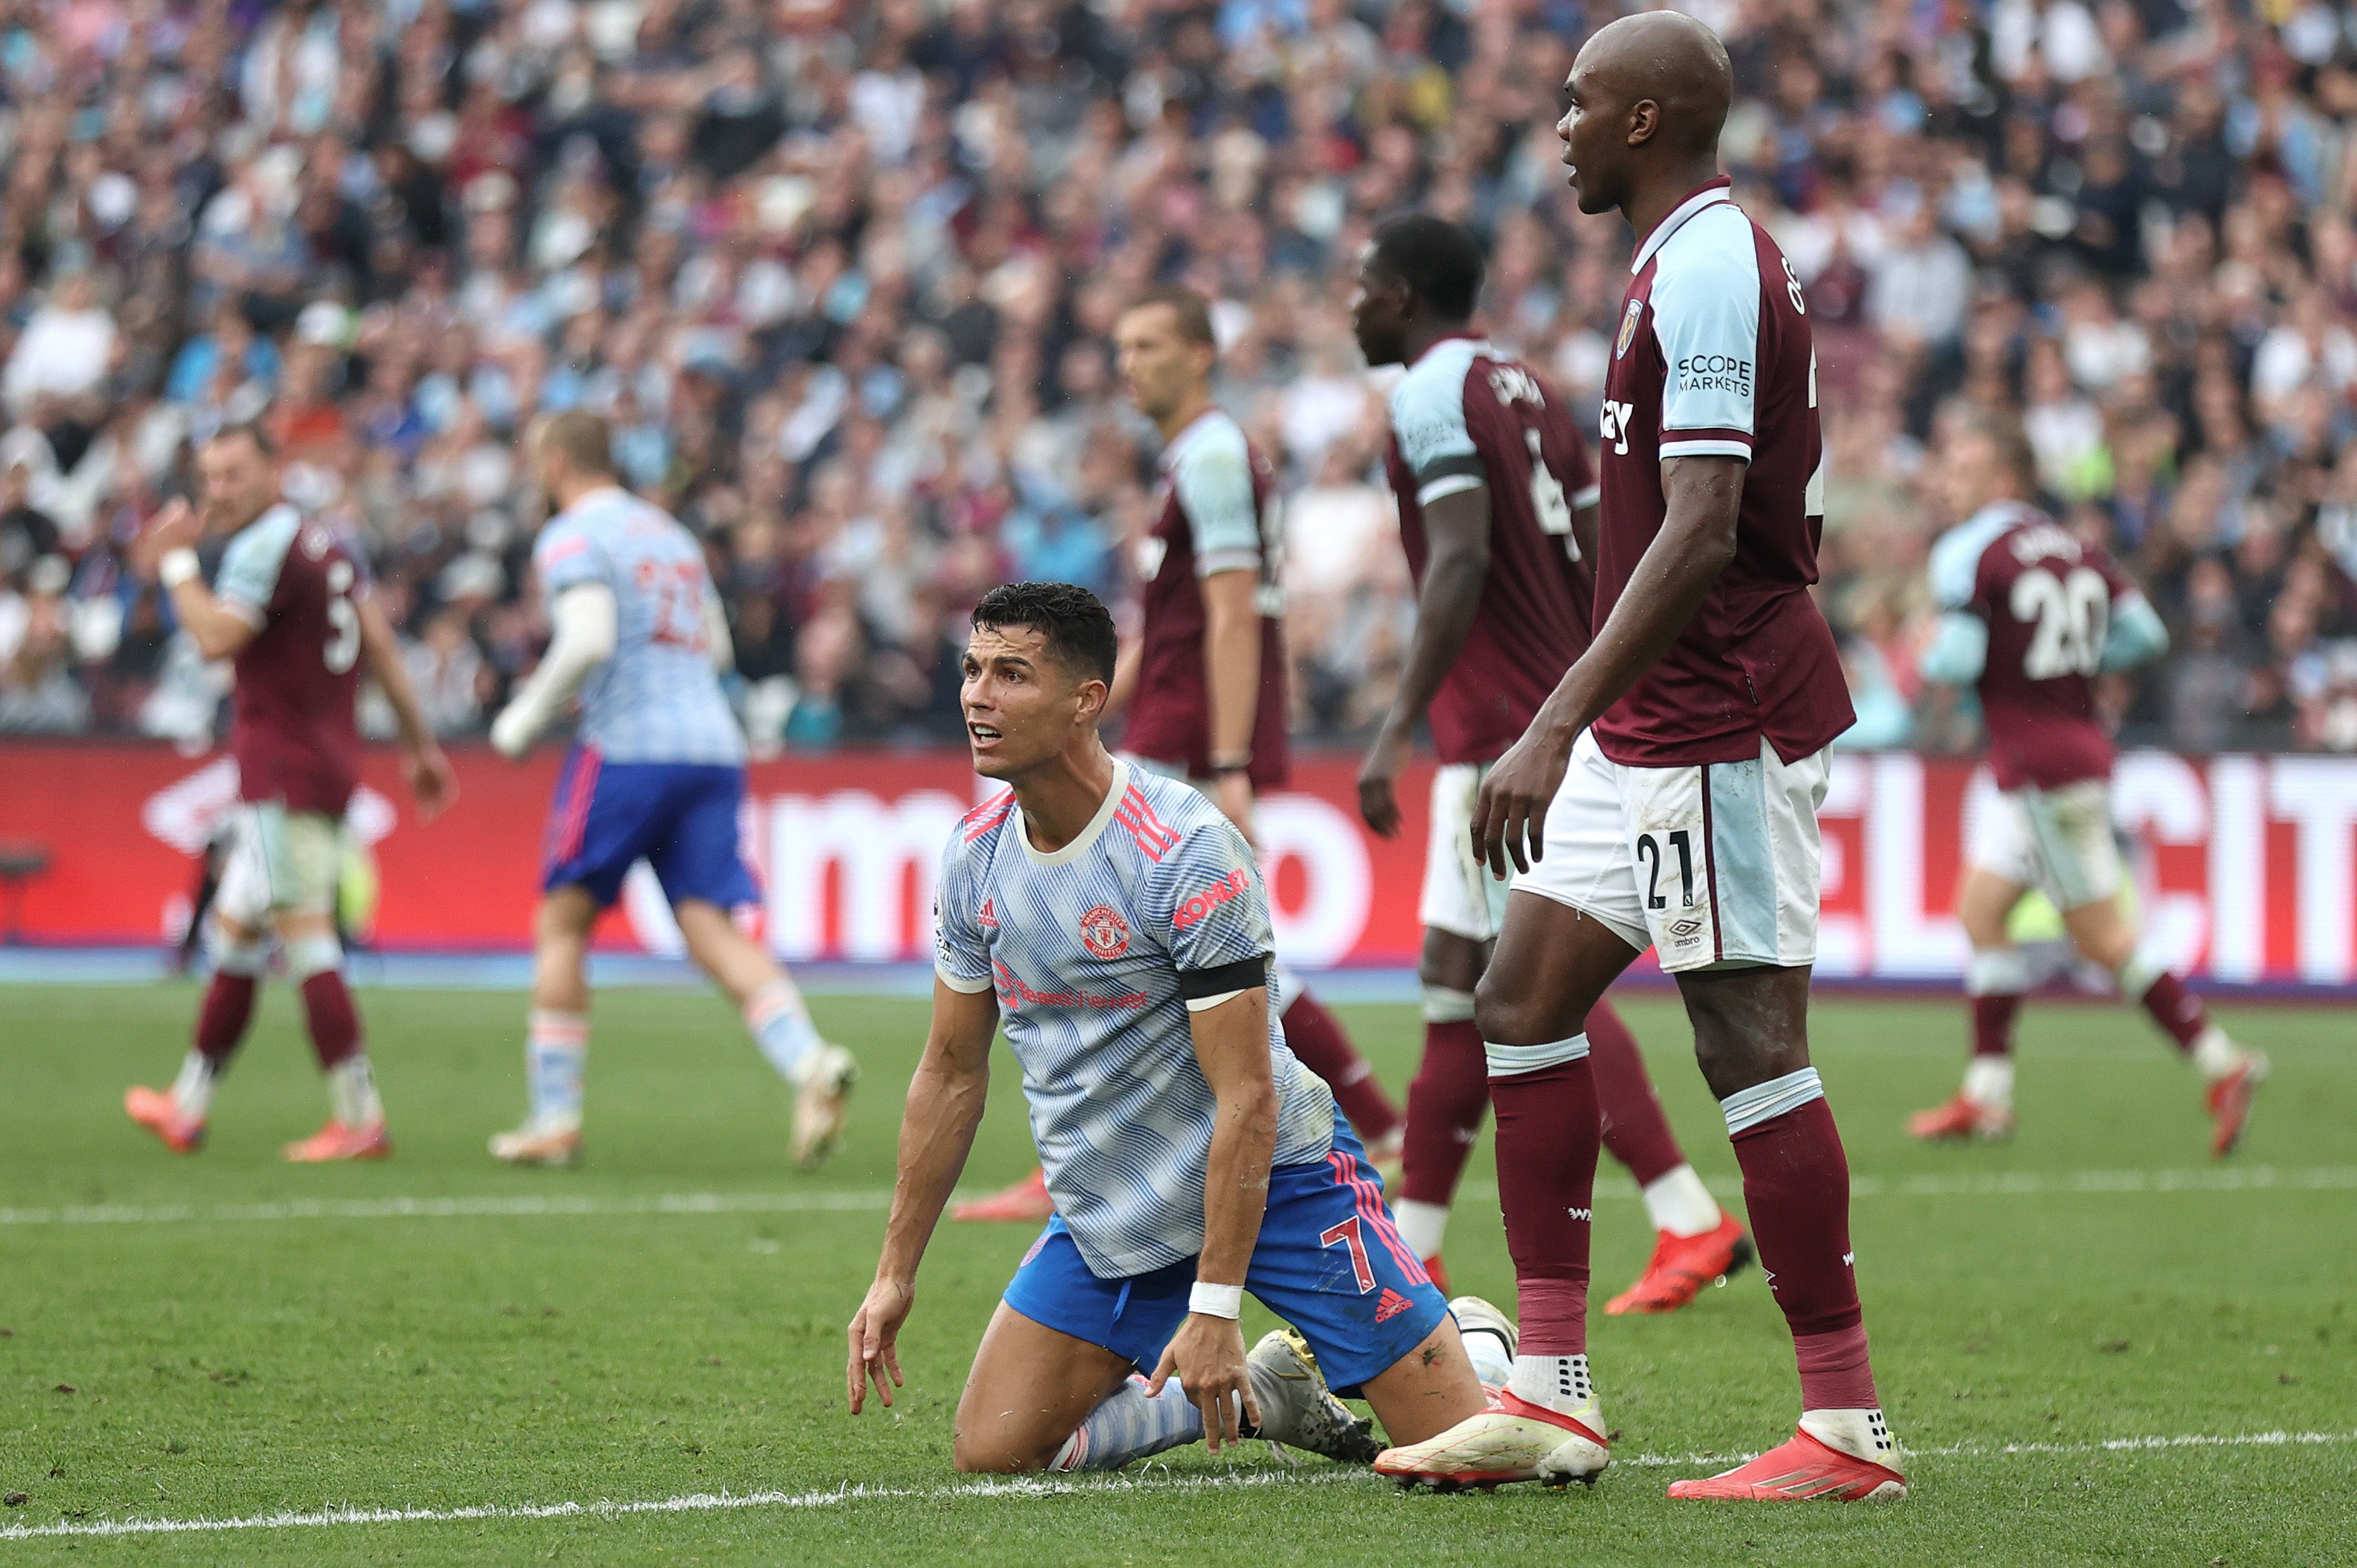 Cristiano Ronaldo was involved in two penalty incidents at the London Stadium